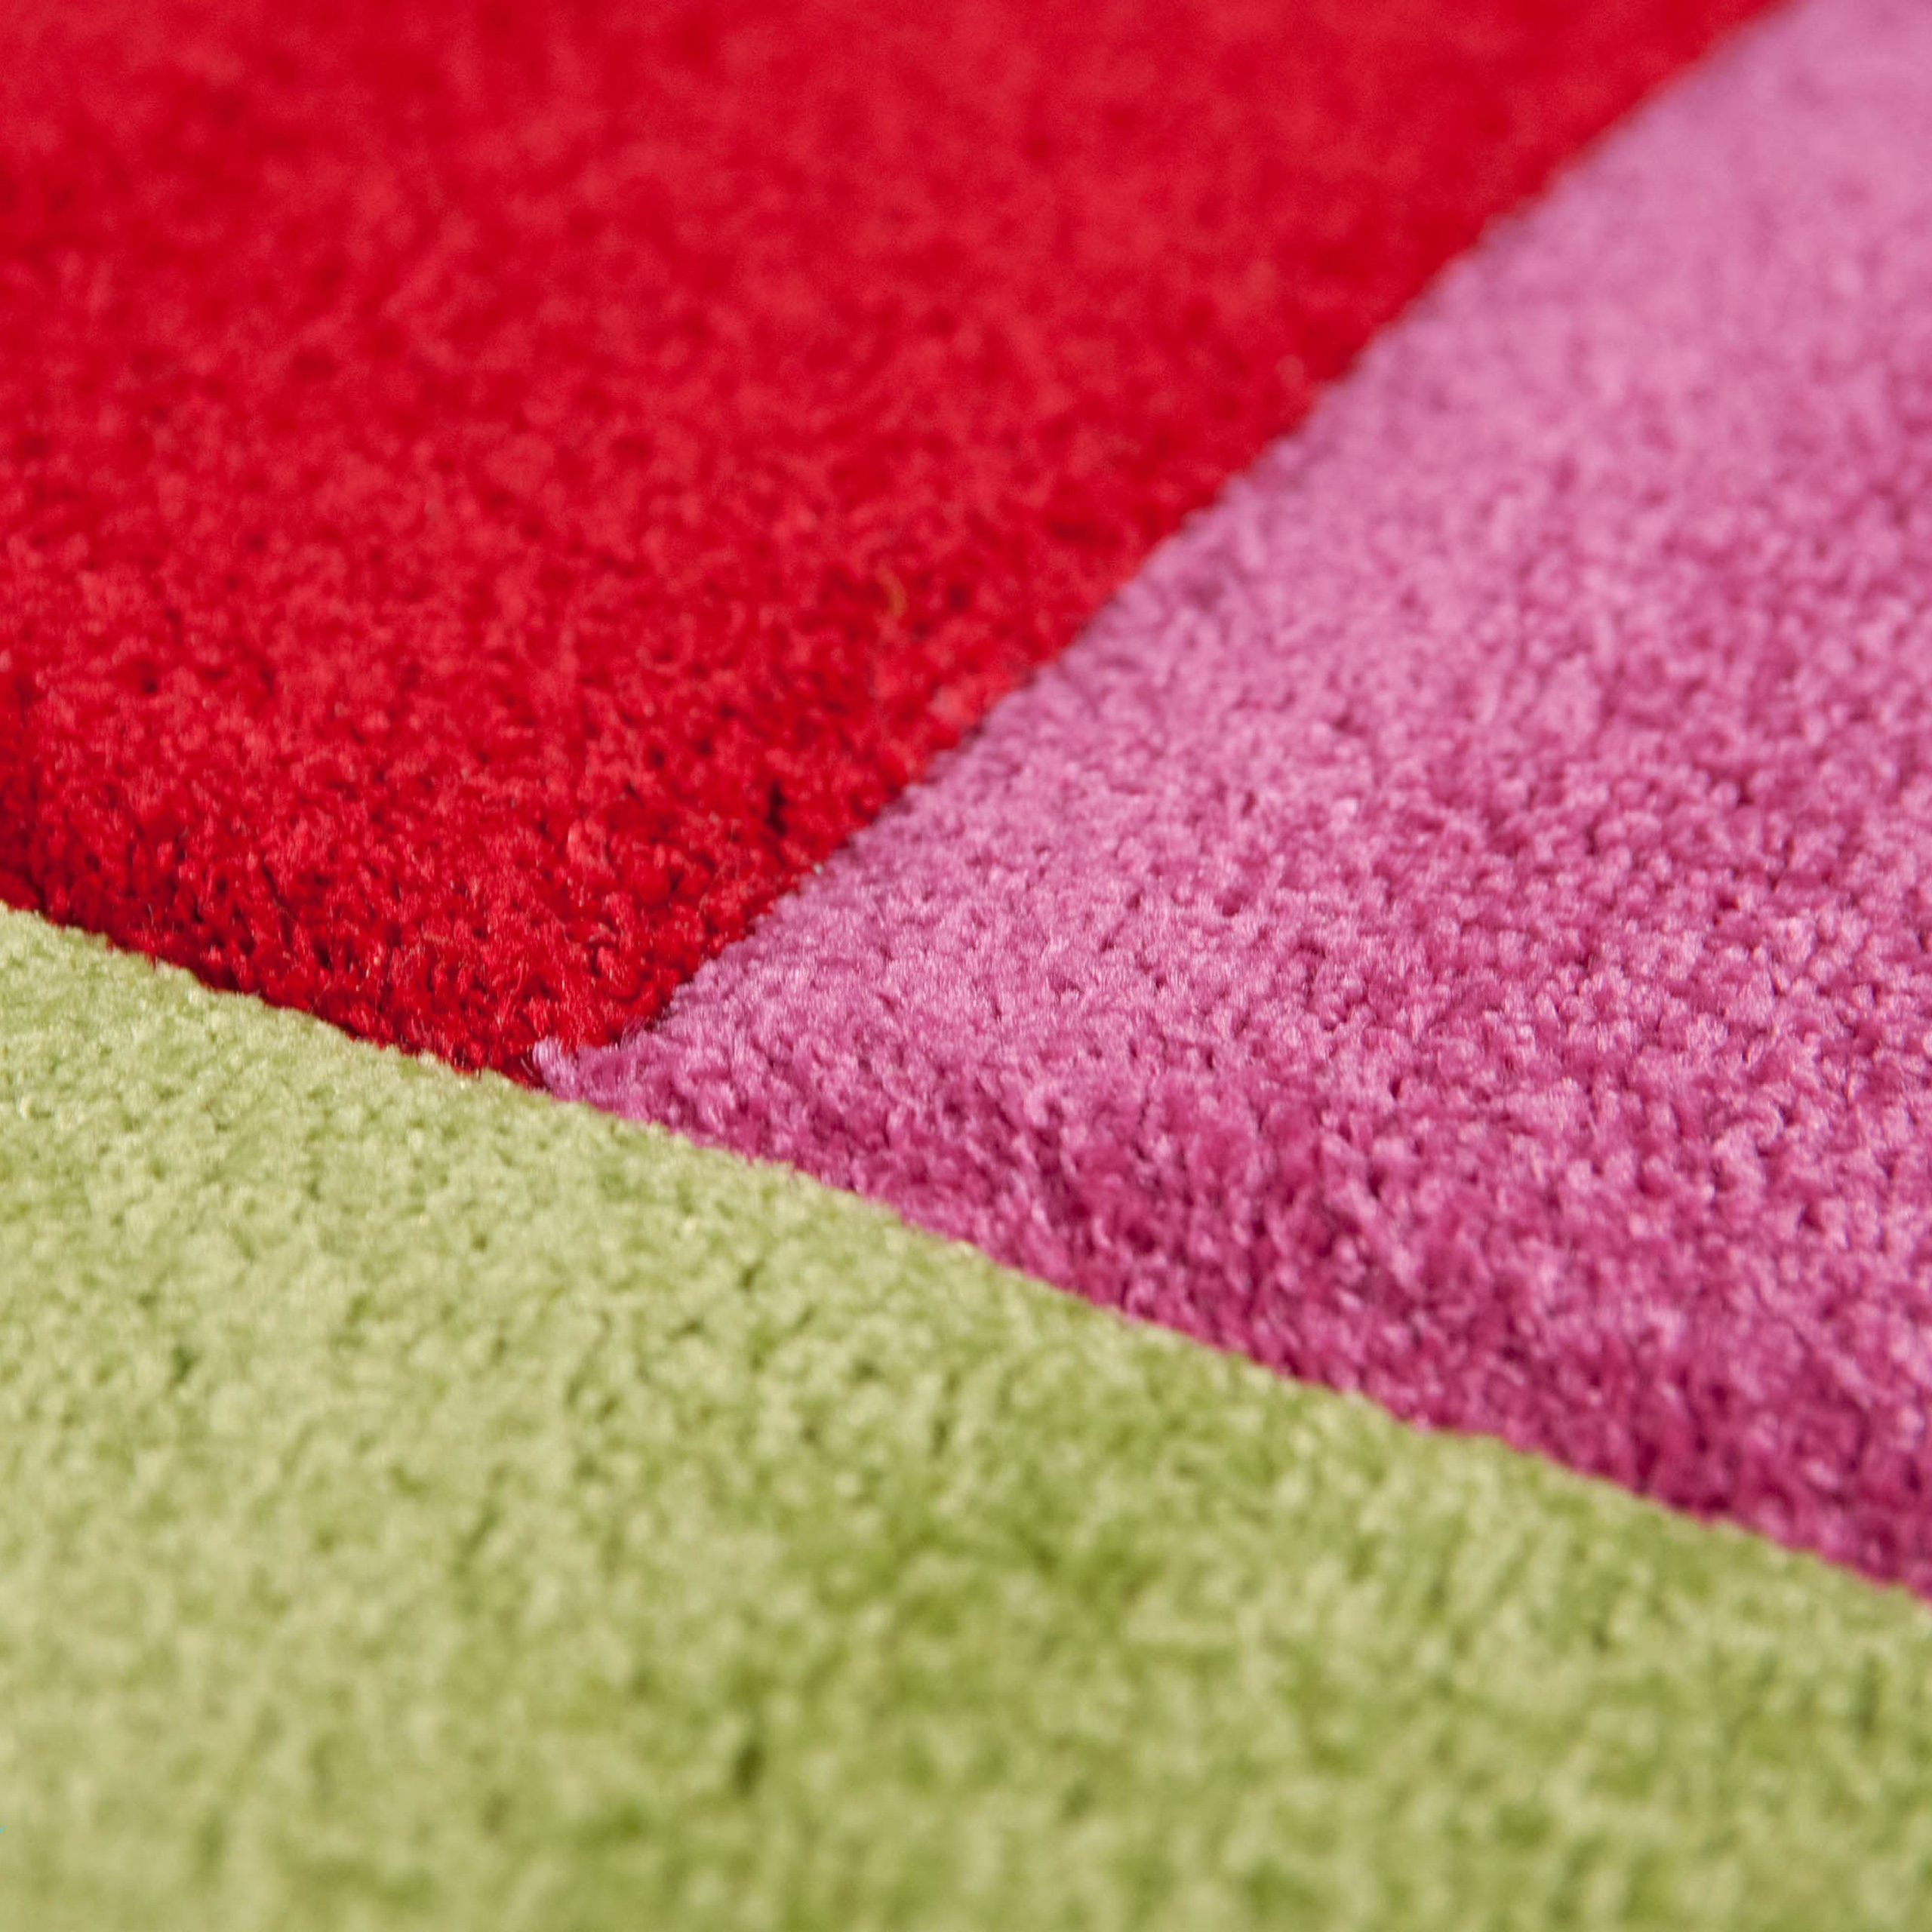 Kids rugs with a car: Allergy-friendly, easy to clean and cheap^carcarpet -  Teppich-Traum